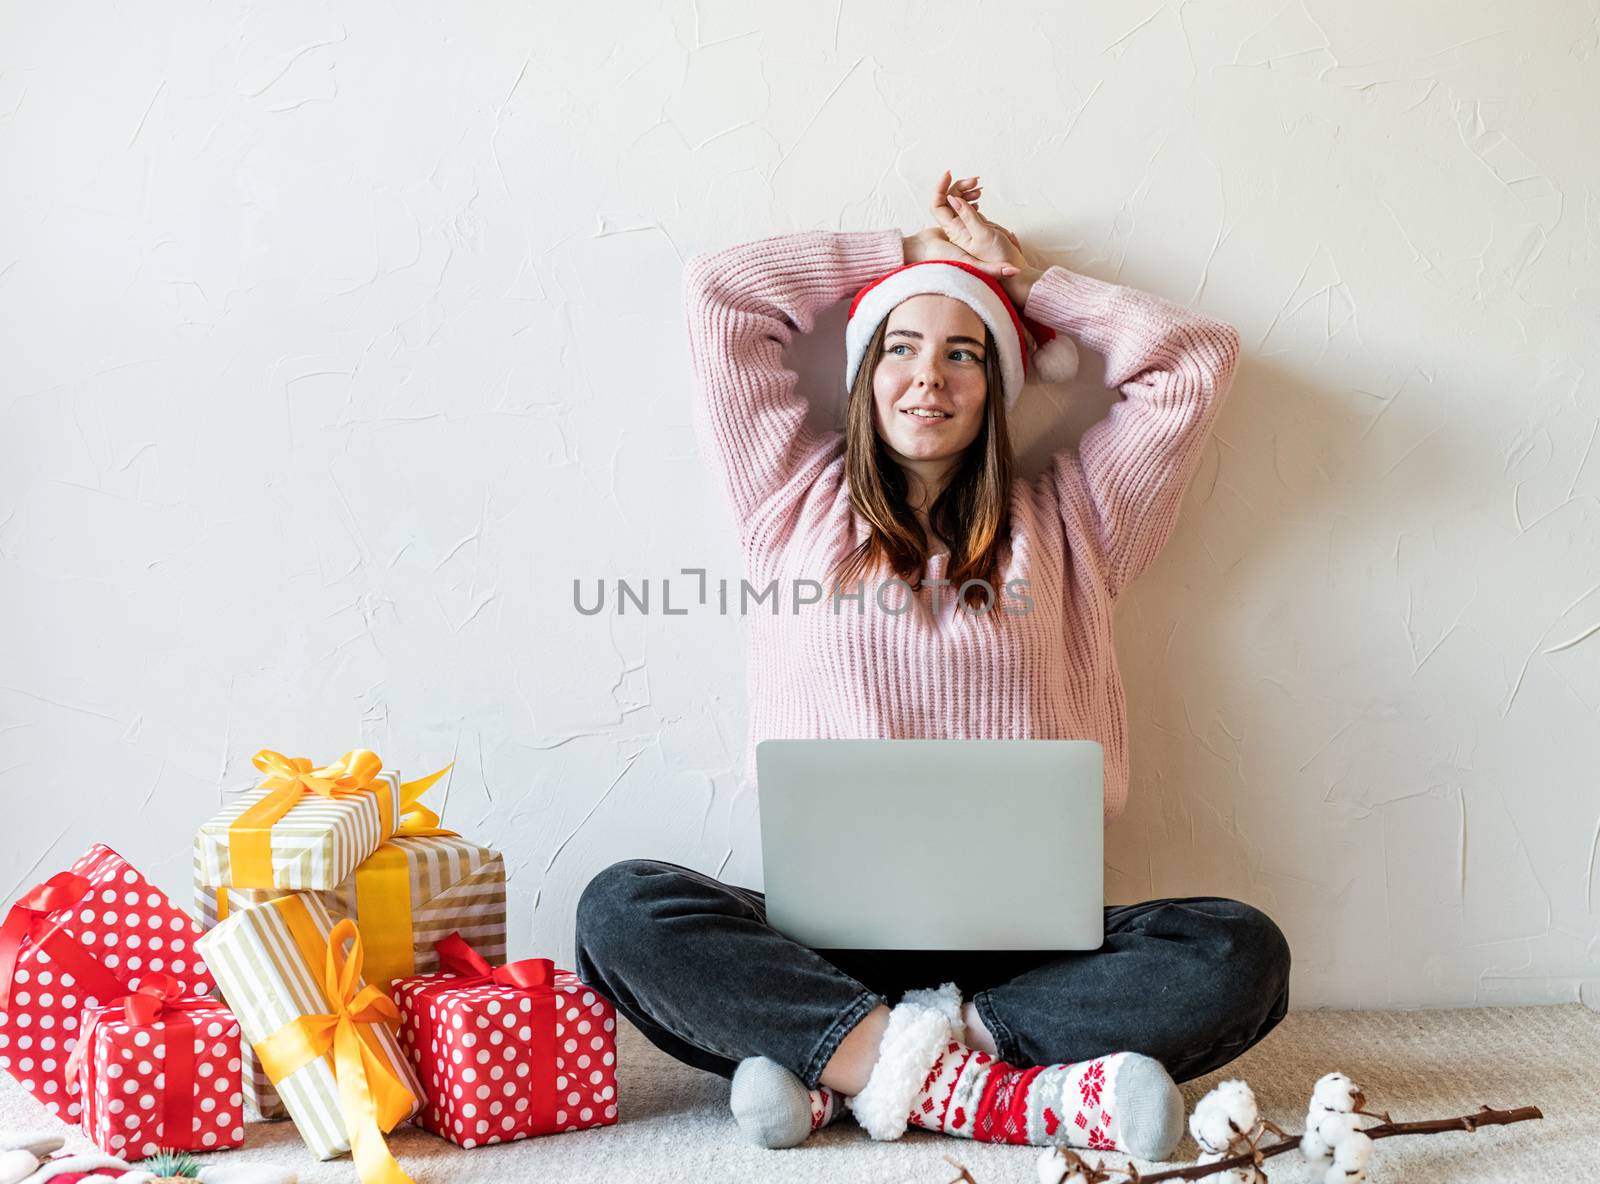 Young woman in santa hat shopping online surrounded by presents by Desperada